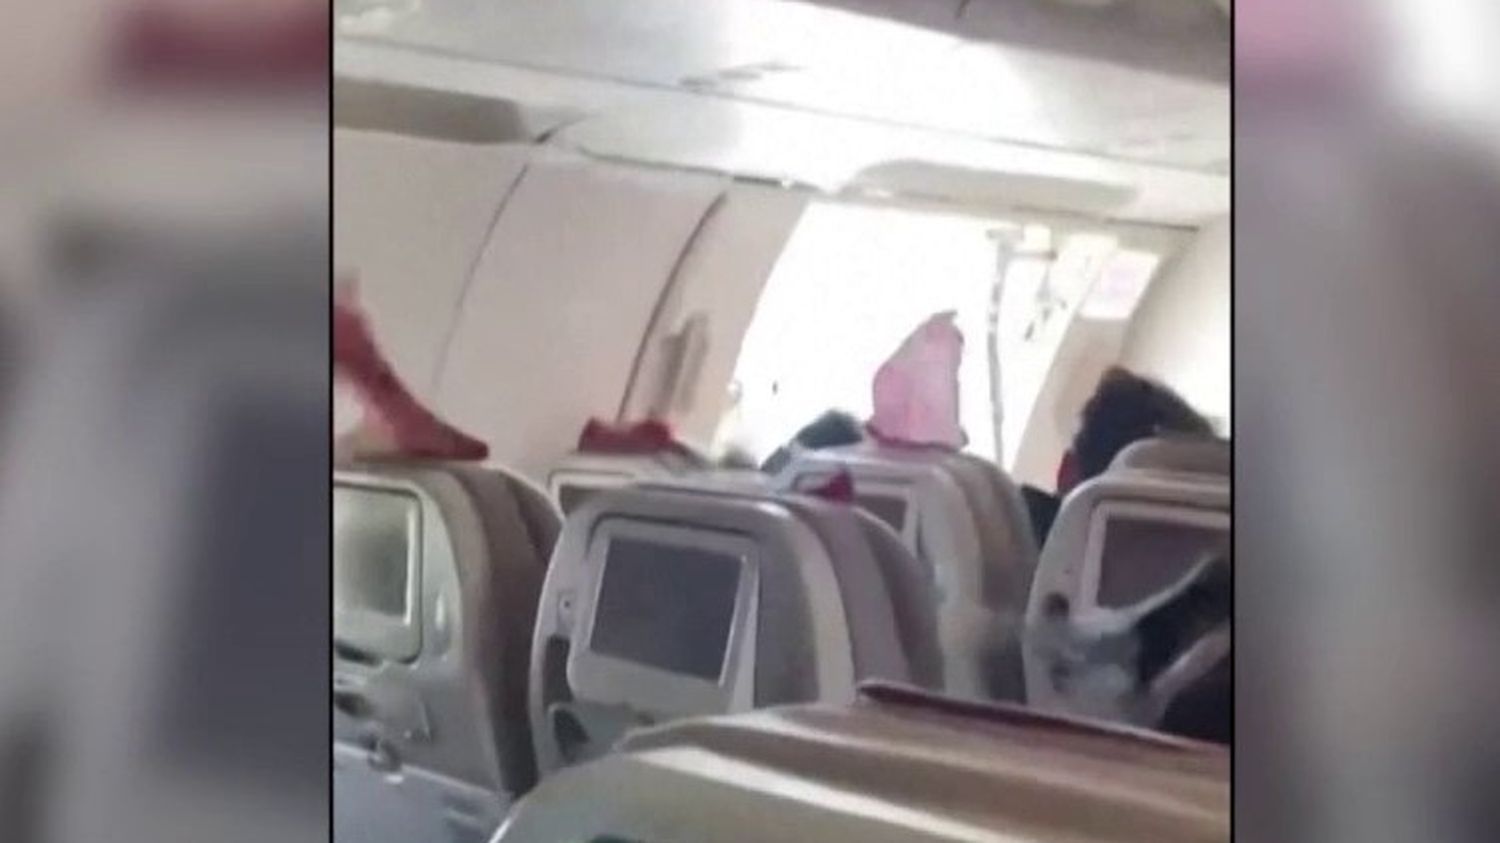 South Korea: A passenger opens the door of a plane in mid-flight
